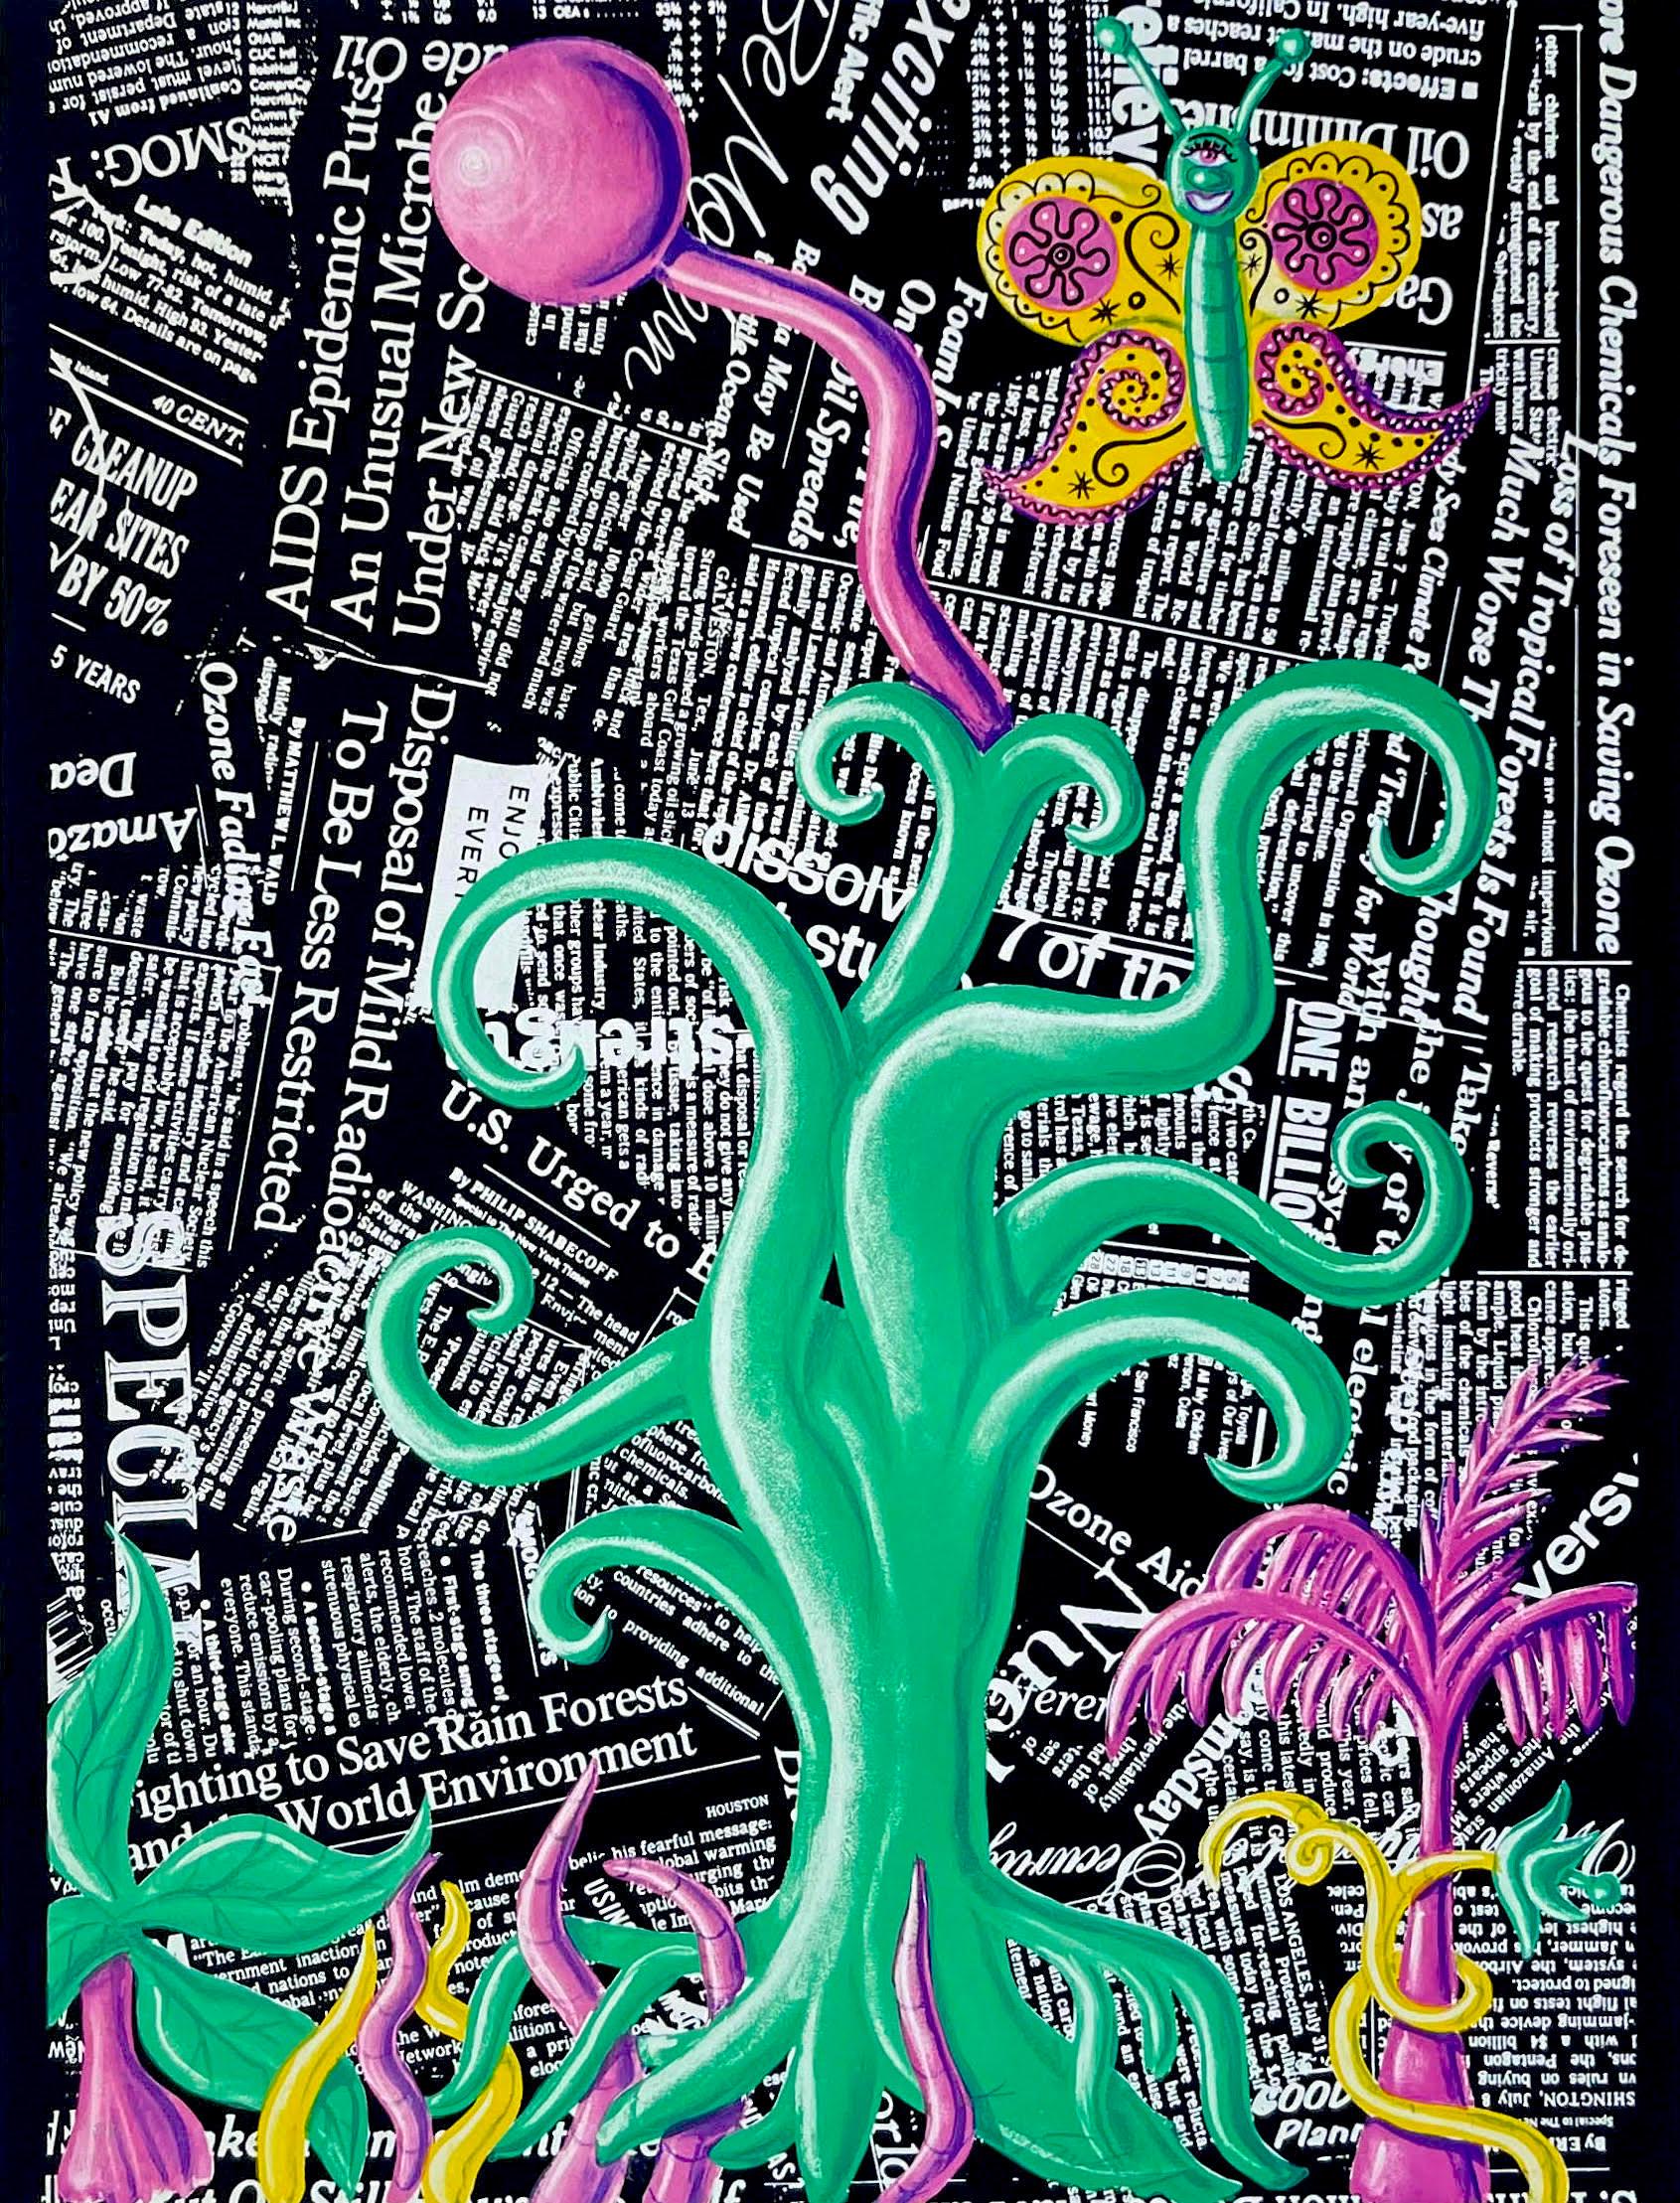 Kenny Scharf Figurative Print - Untitled from the portfolio "Columbus: In Search of a New Tomorrow"